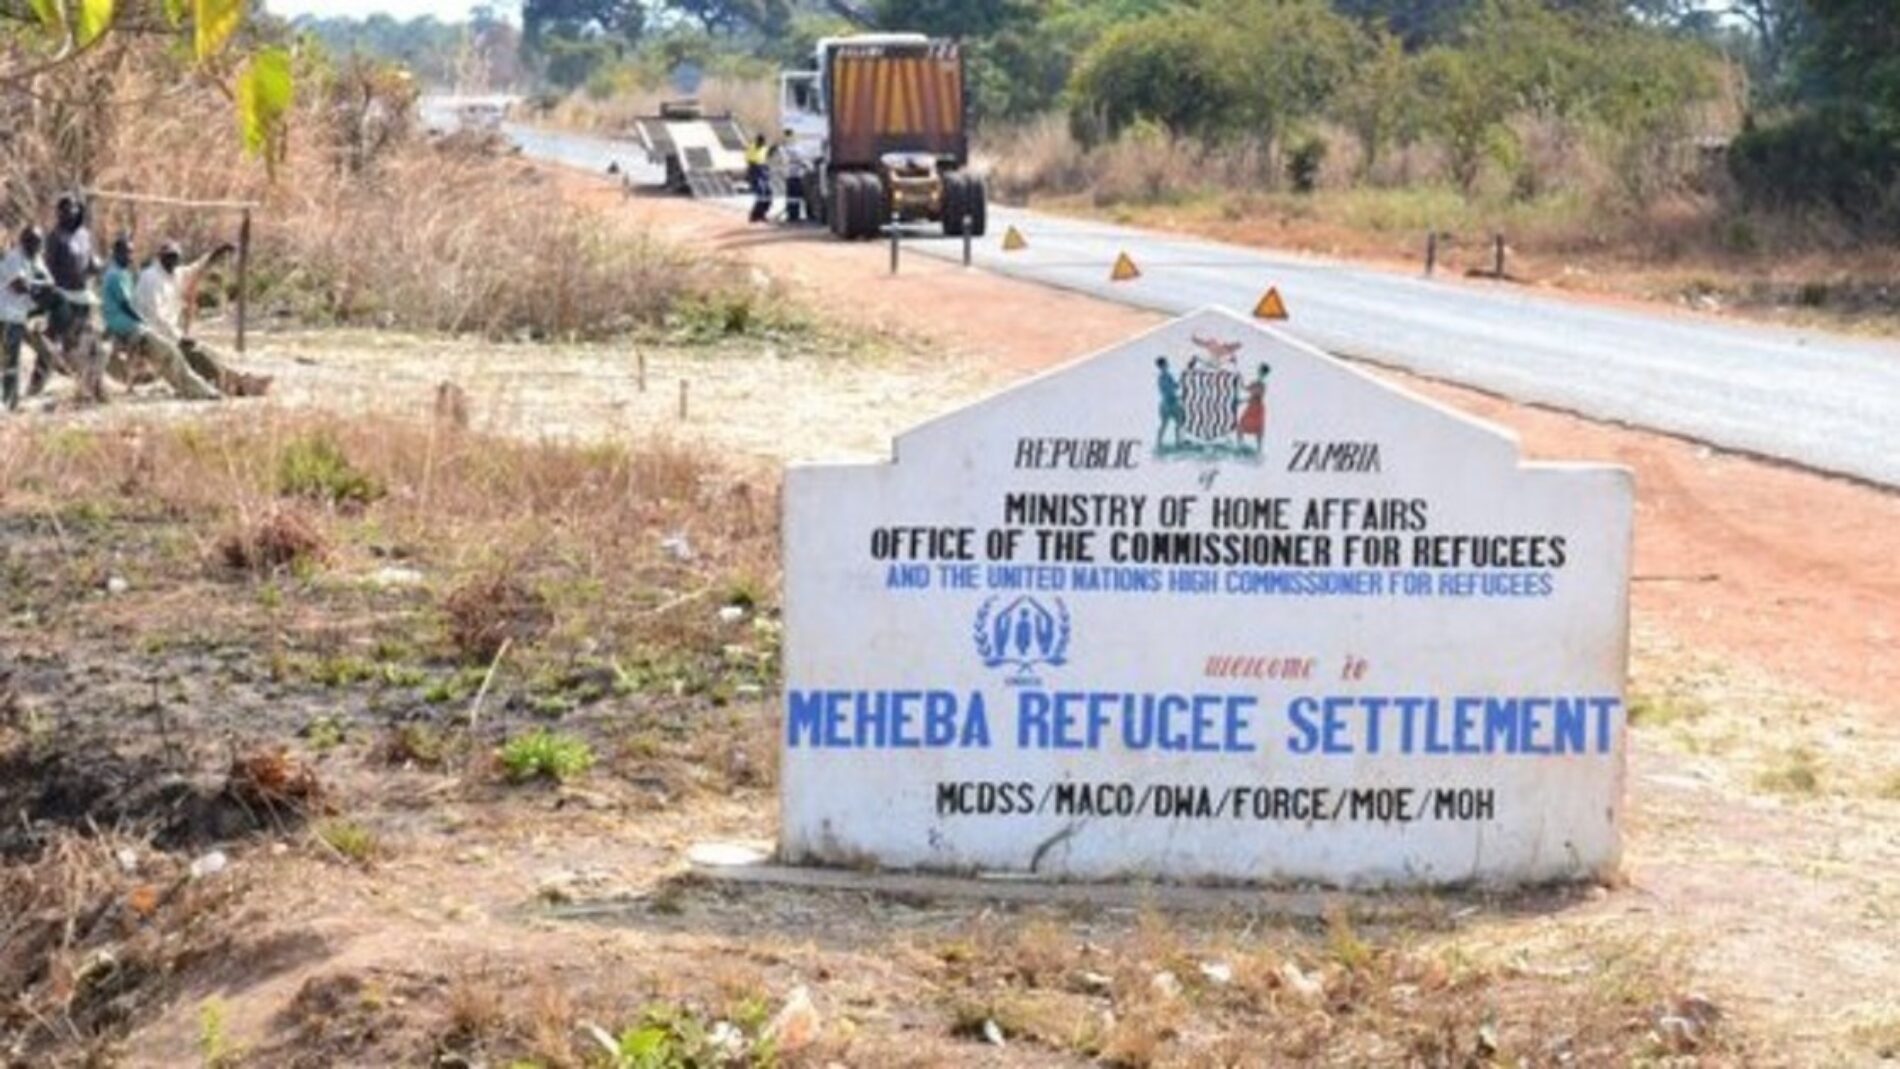 Meheba (Zambia): UNHCR has laid off around 50 refugee workers